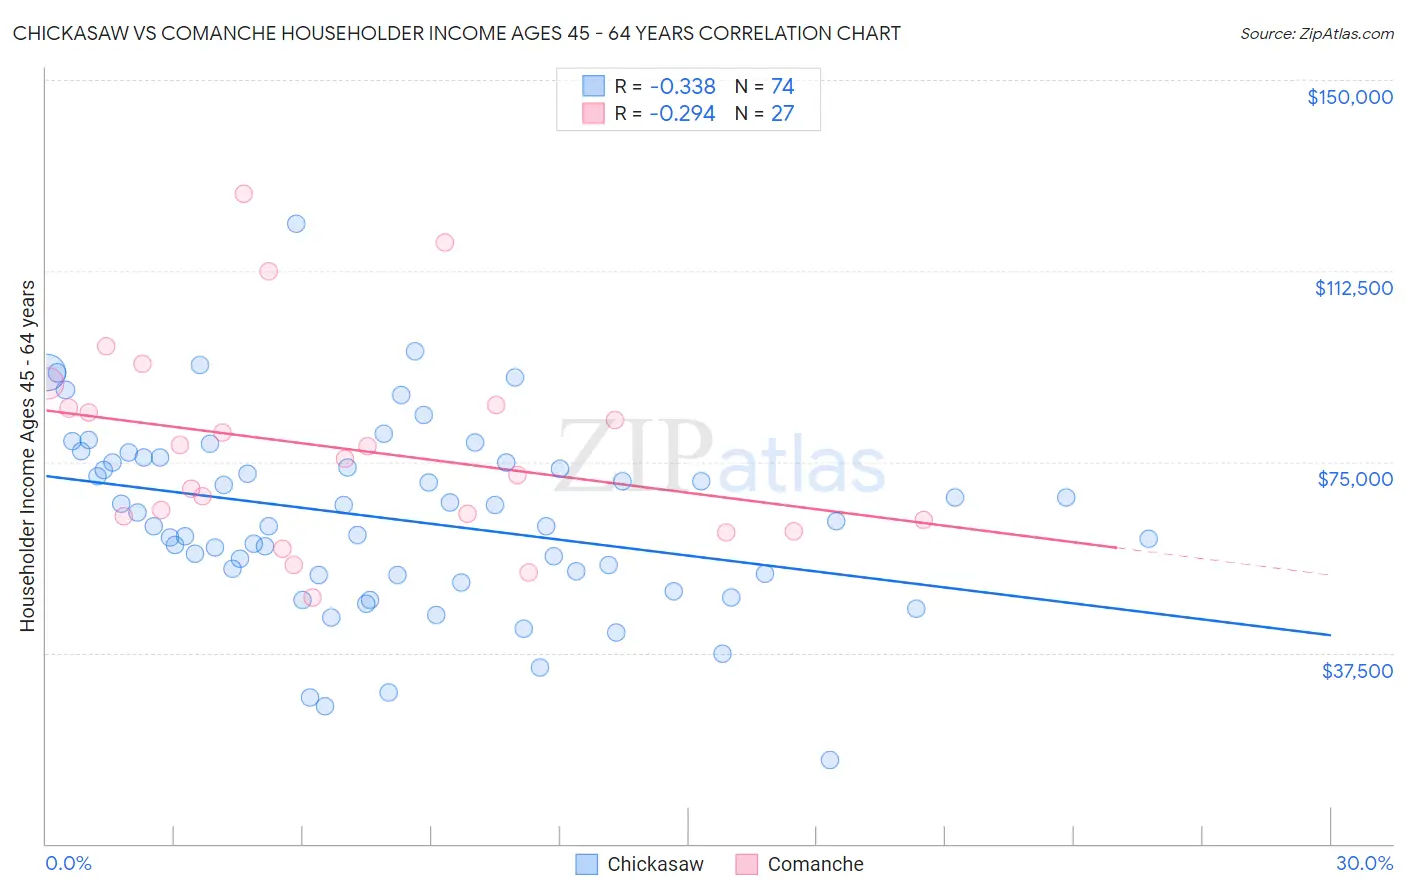 Chickasaw vs Comanche Householder Income Ages 45 - 64 years